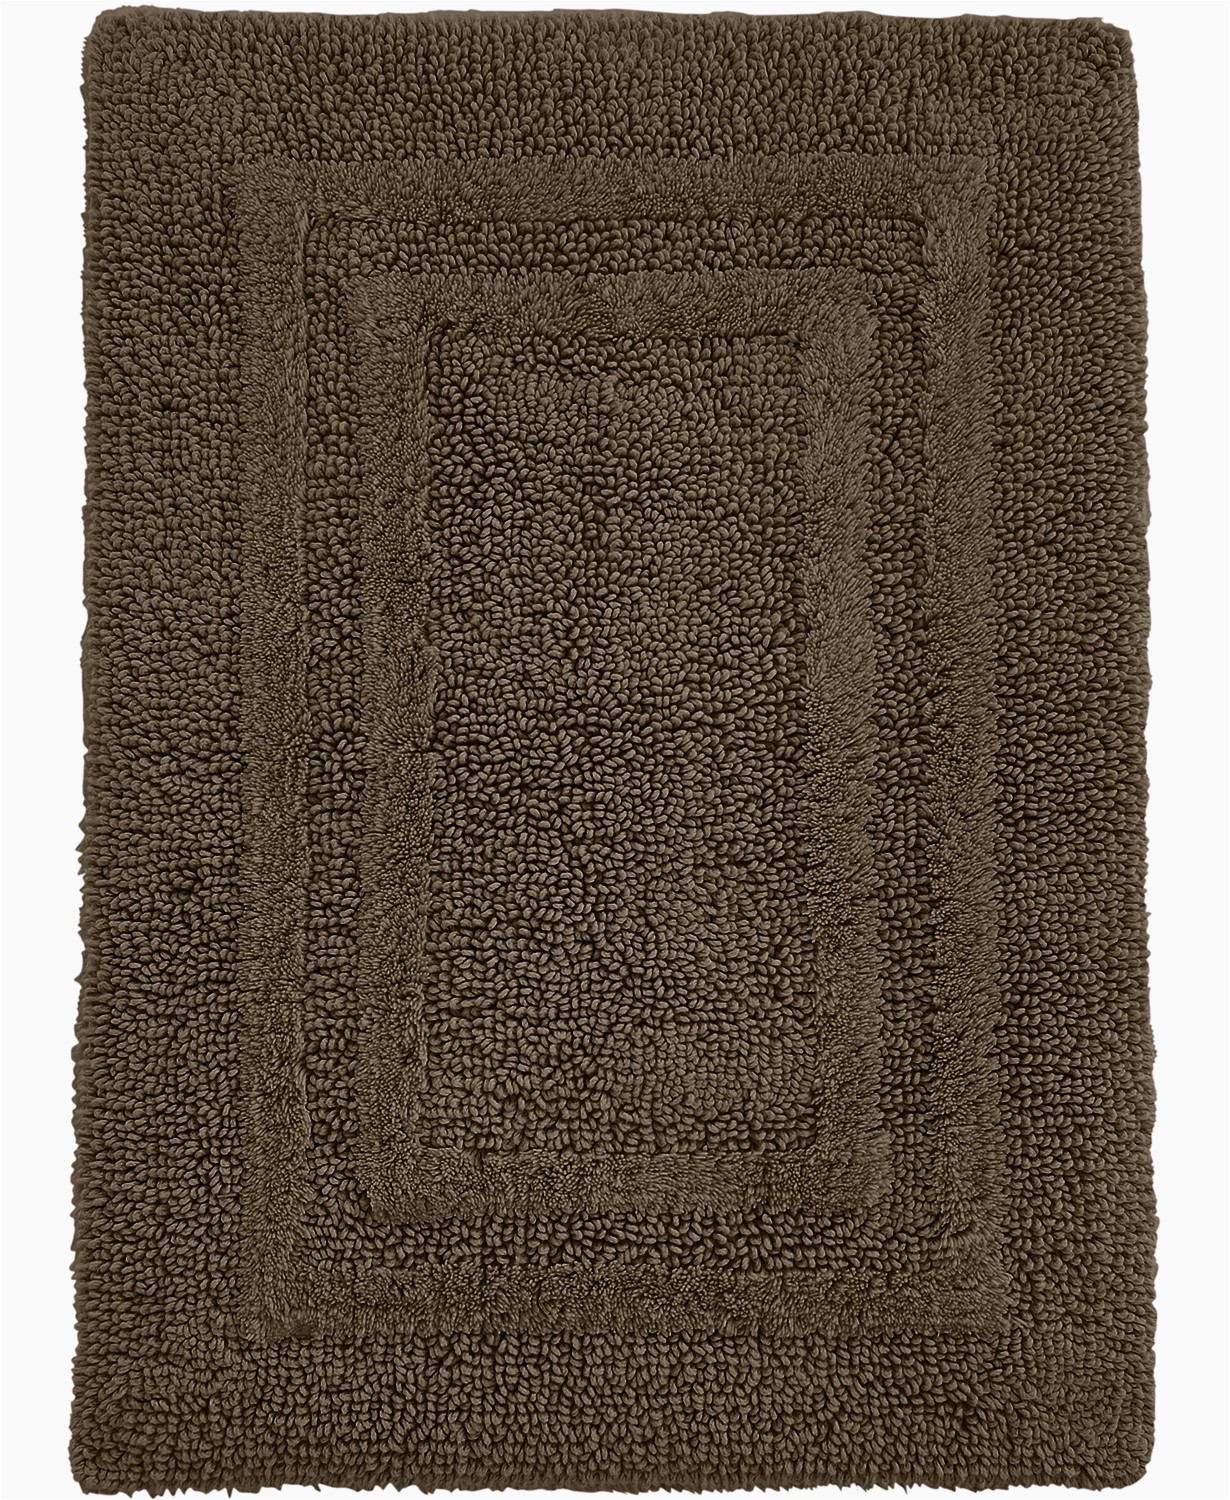 All Cotton Reversible Bath Rugs Hotel Collection Cotton Reversible 18 Inches X 25 Inches Bath Rug Pamper Your Feet with This Super soft Reversible Bath Rug Chocolate